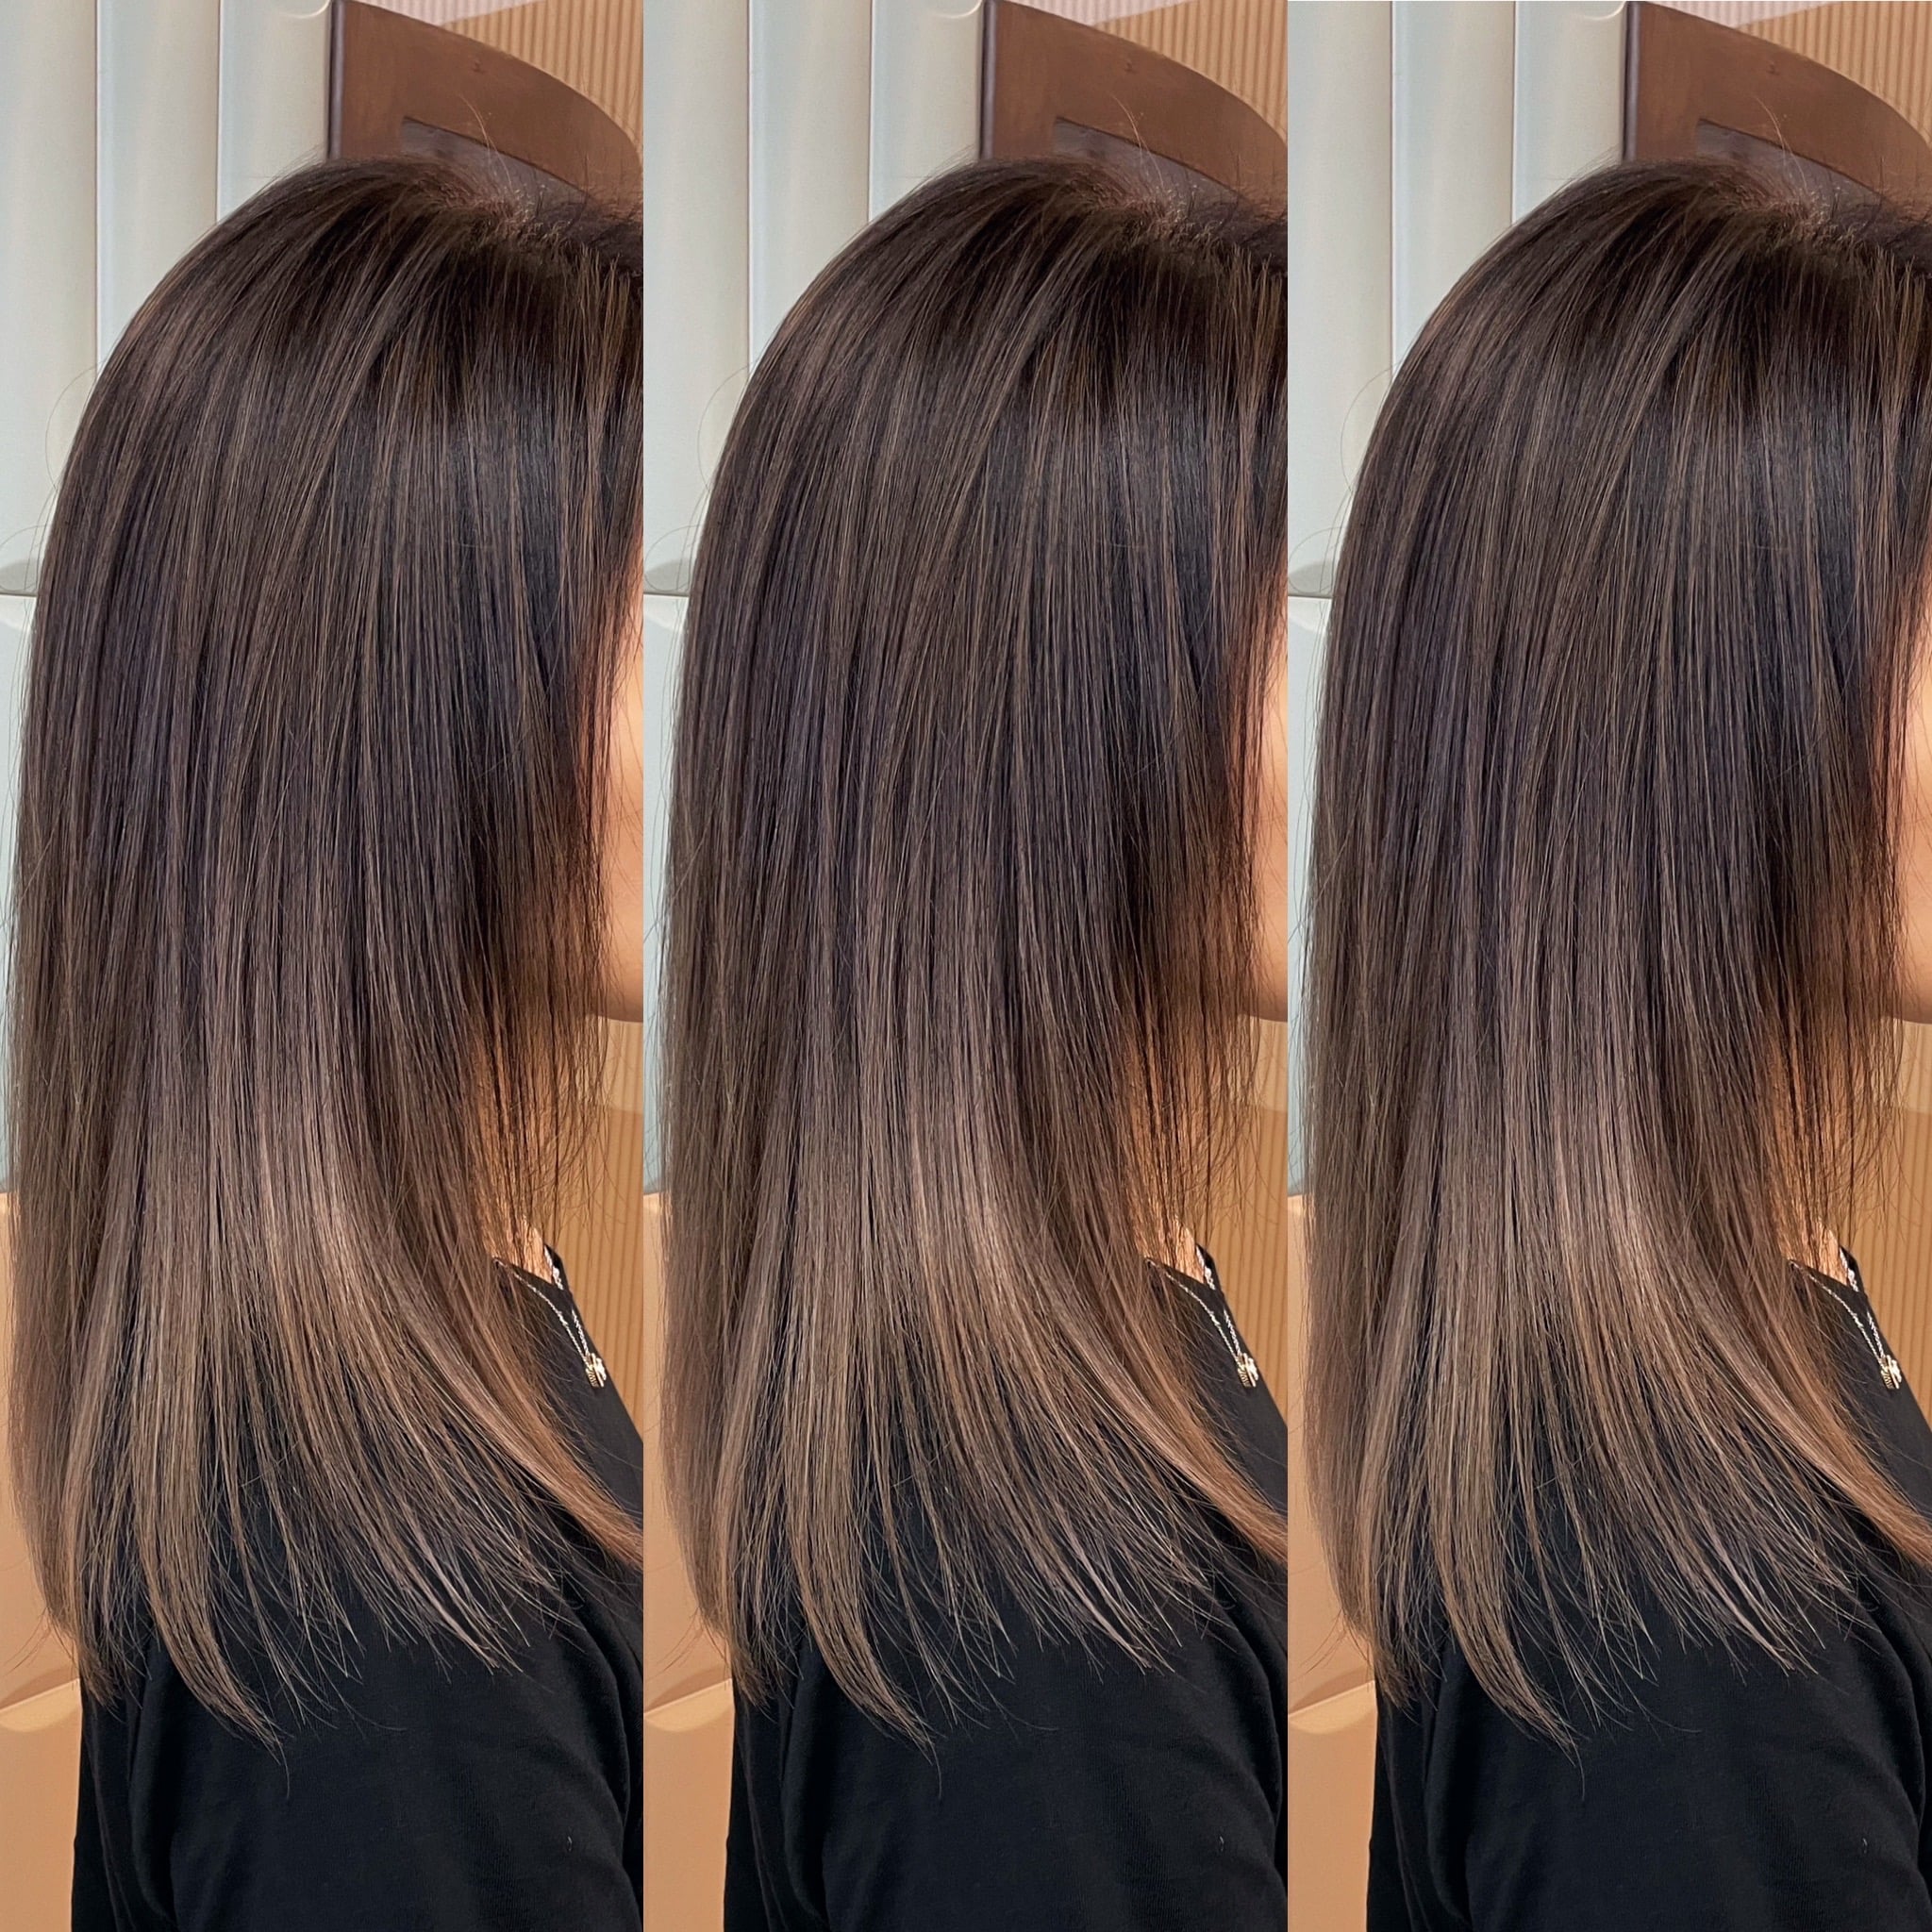 Rich Brunette Hair Trend X Airtouch Balayage Designed by Associate Director of Chez Vous: Private Space, Joyce Wan